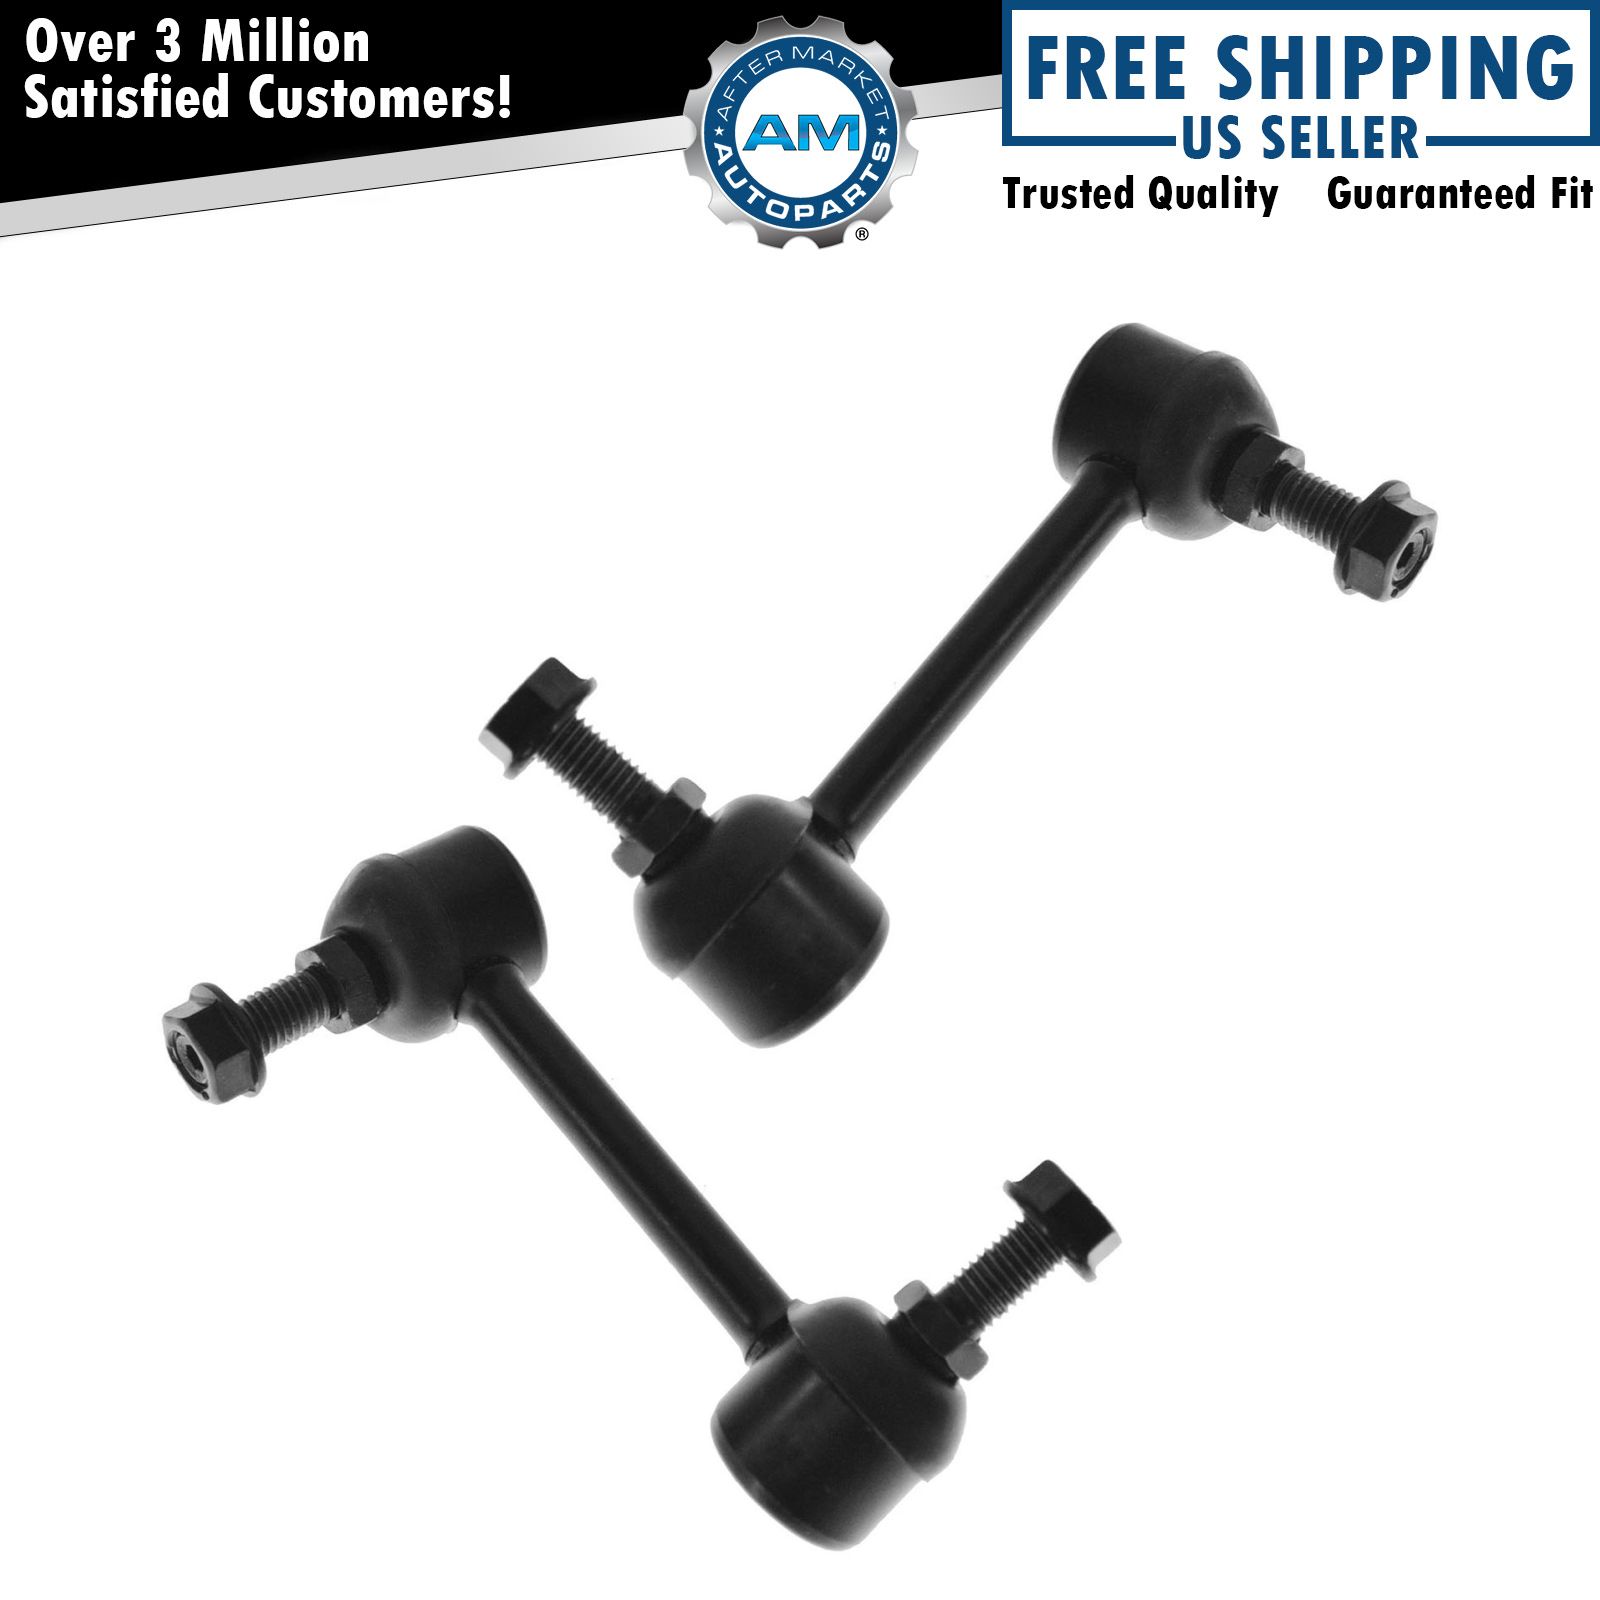 Rear Sway Bar Link Kit Pair Set for Buick Chevy GMC Isuzu Olds Saab Truck SUV